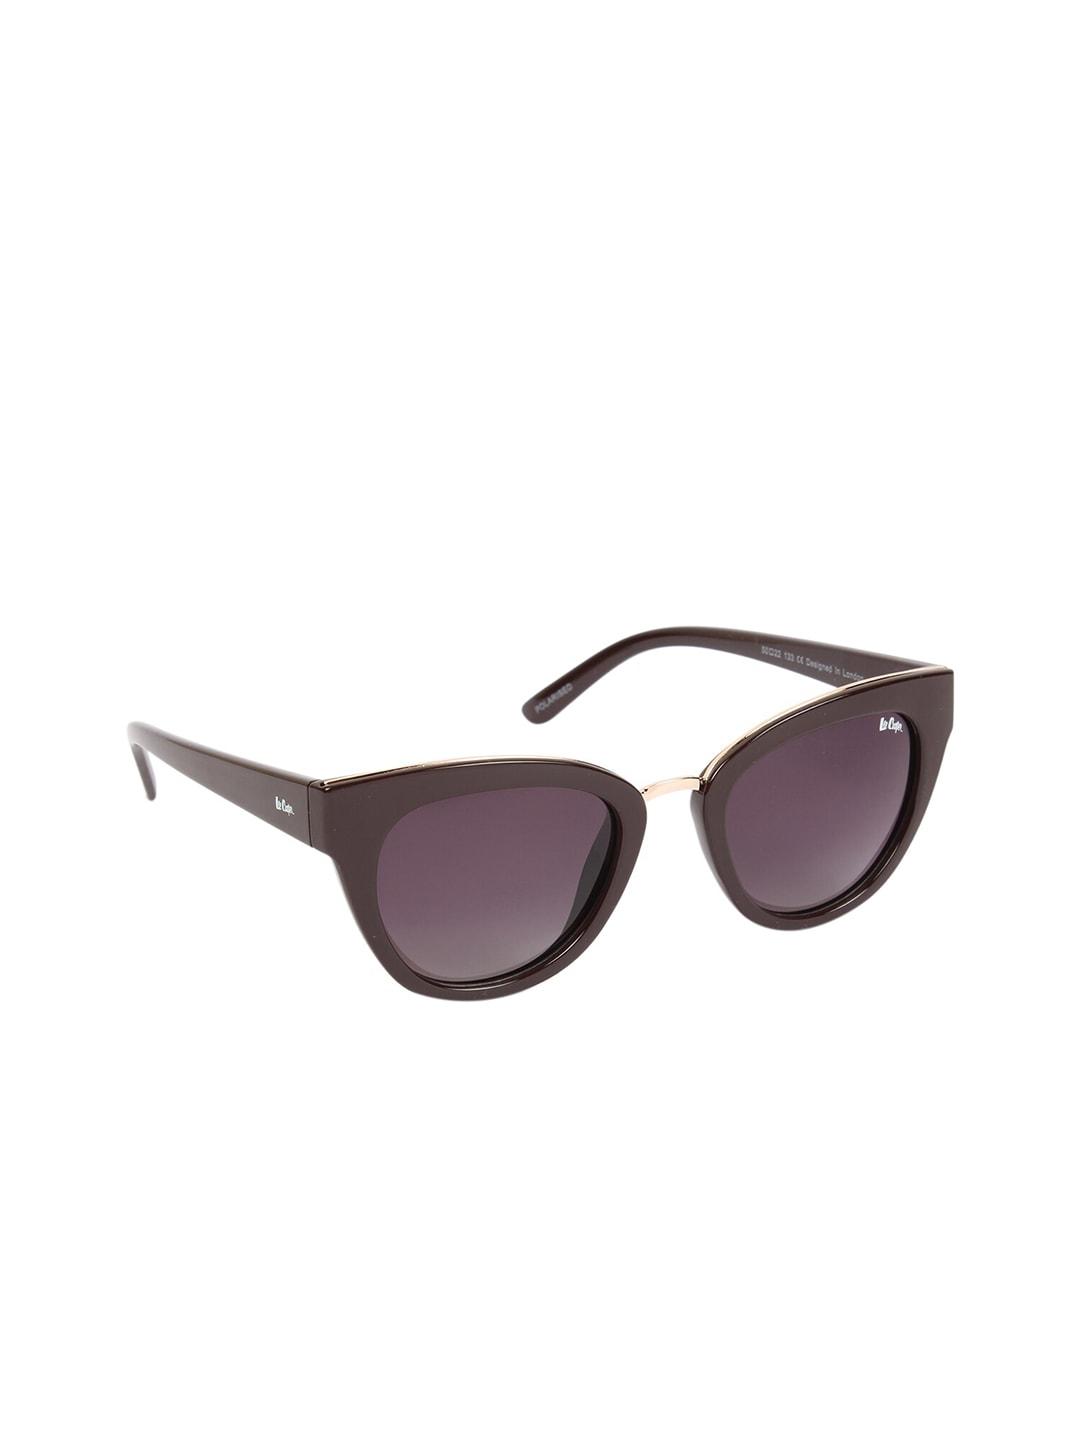 Lee Cooper Women Purple Lens & Brown Cateye Sunglasses with Polarised Lens LC9166NTBPOL